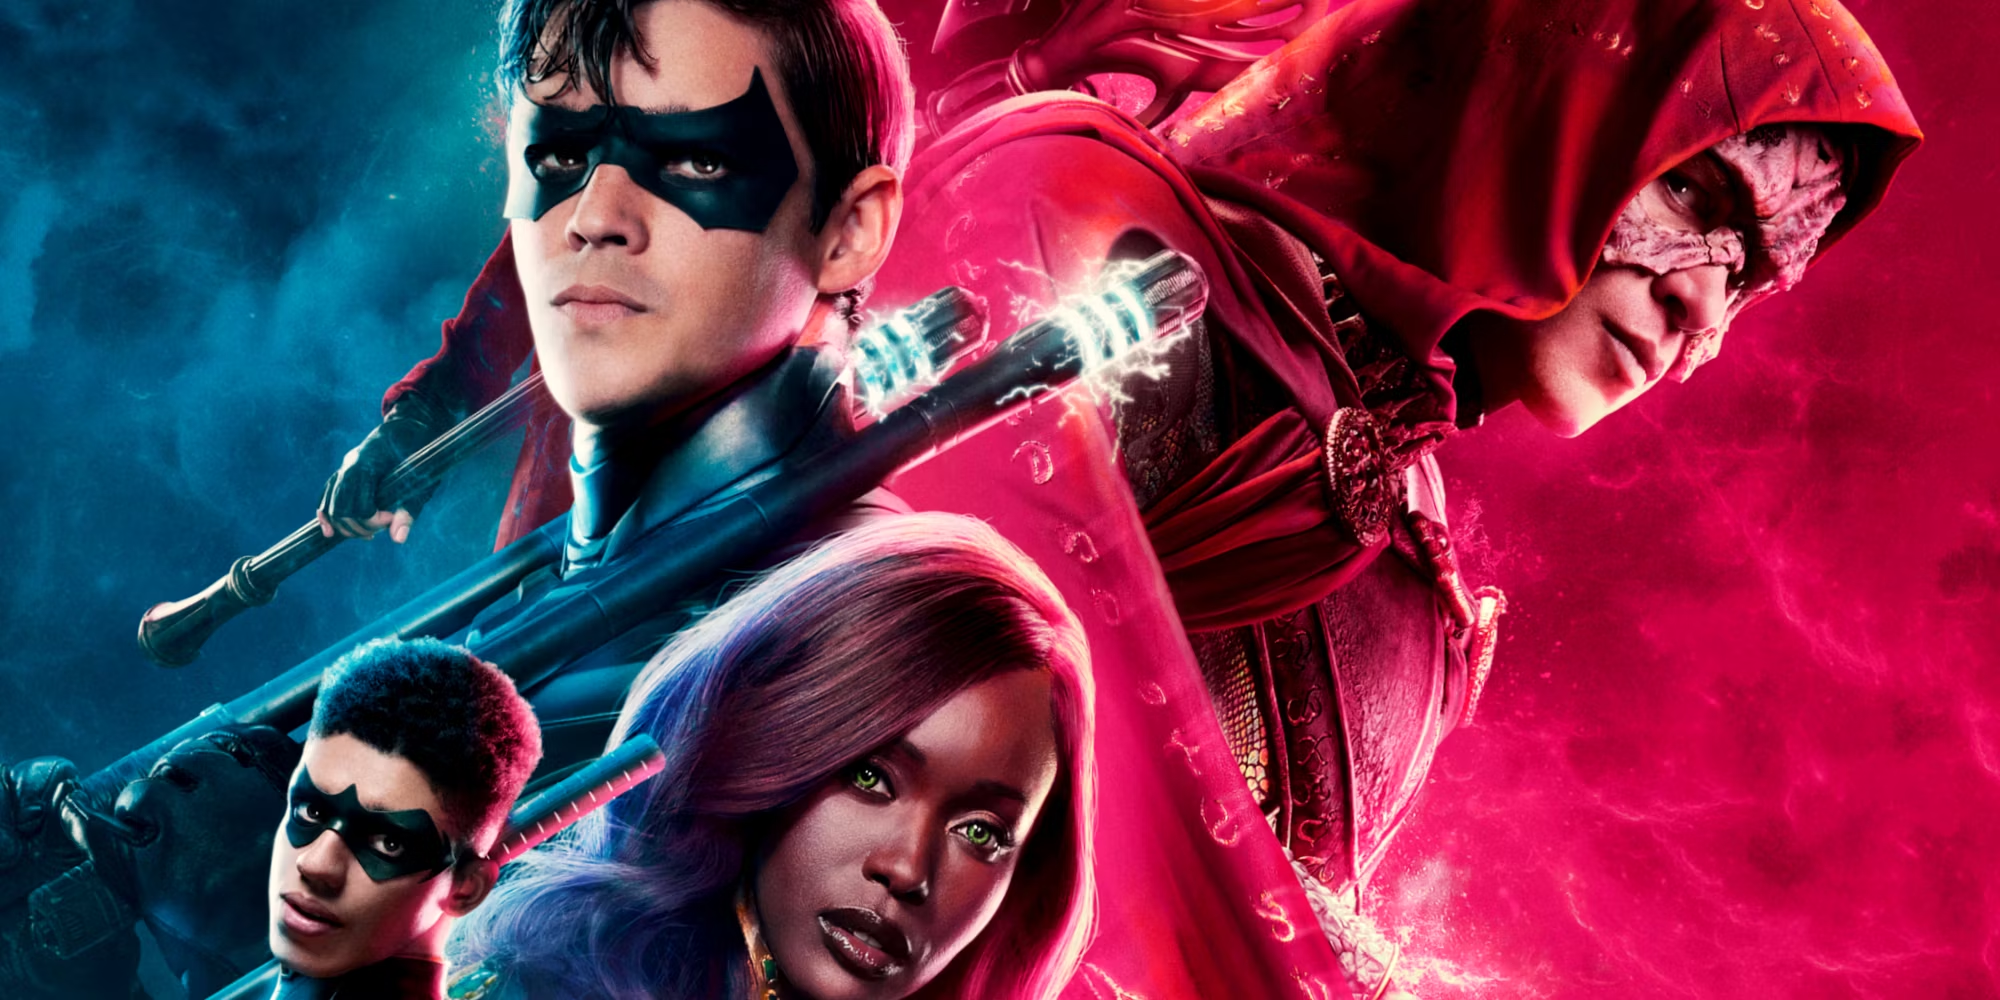 Titans Season 4 Episode 11 Release Date, Time and Where to Watch